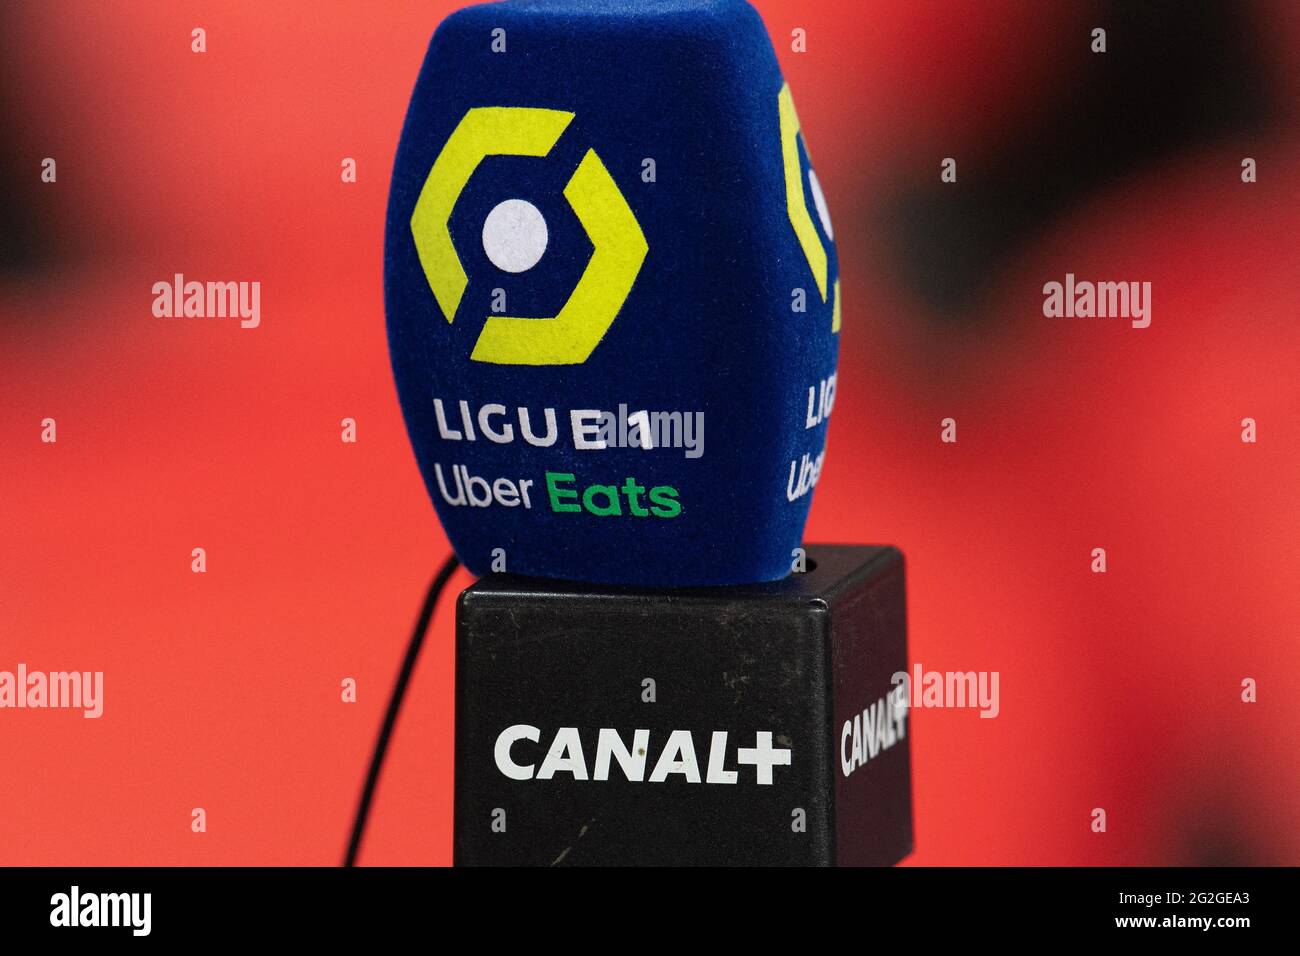 File photo - Illustration picture of Canal + and Ligue 1 Uber Eats during  the Ligue 1 the Ligue 1 match between Paris Saint Germain and AS Monaco at  Parc des Princes